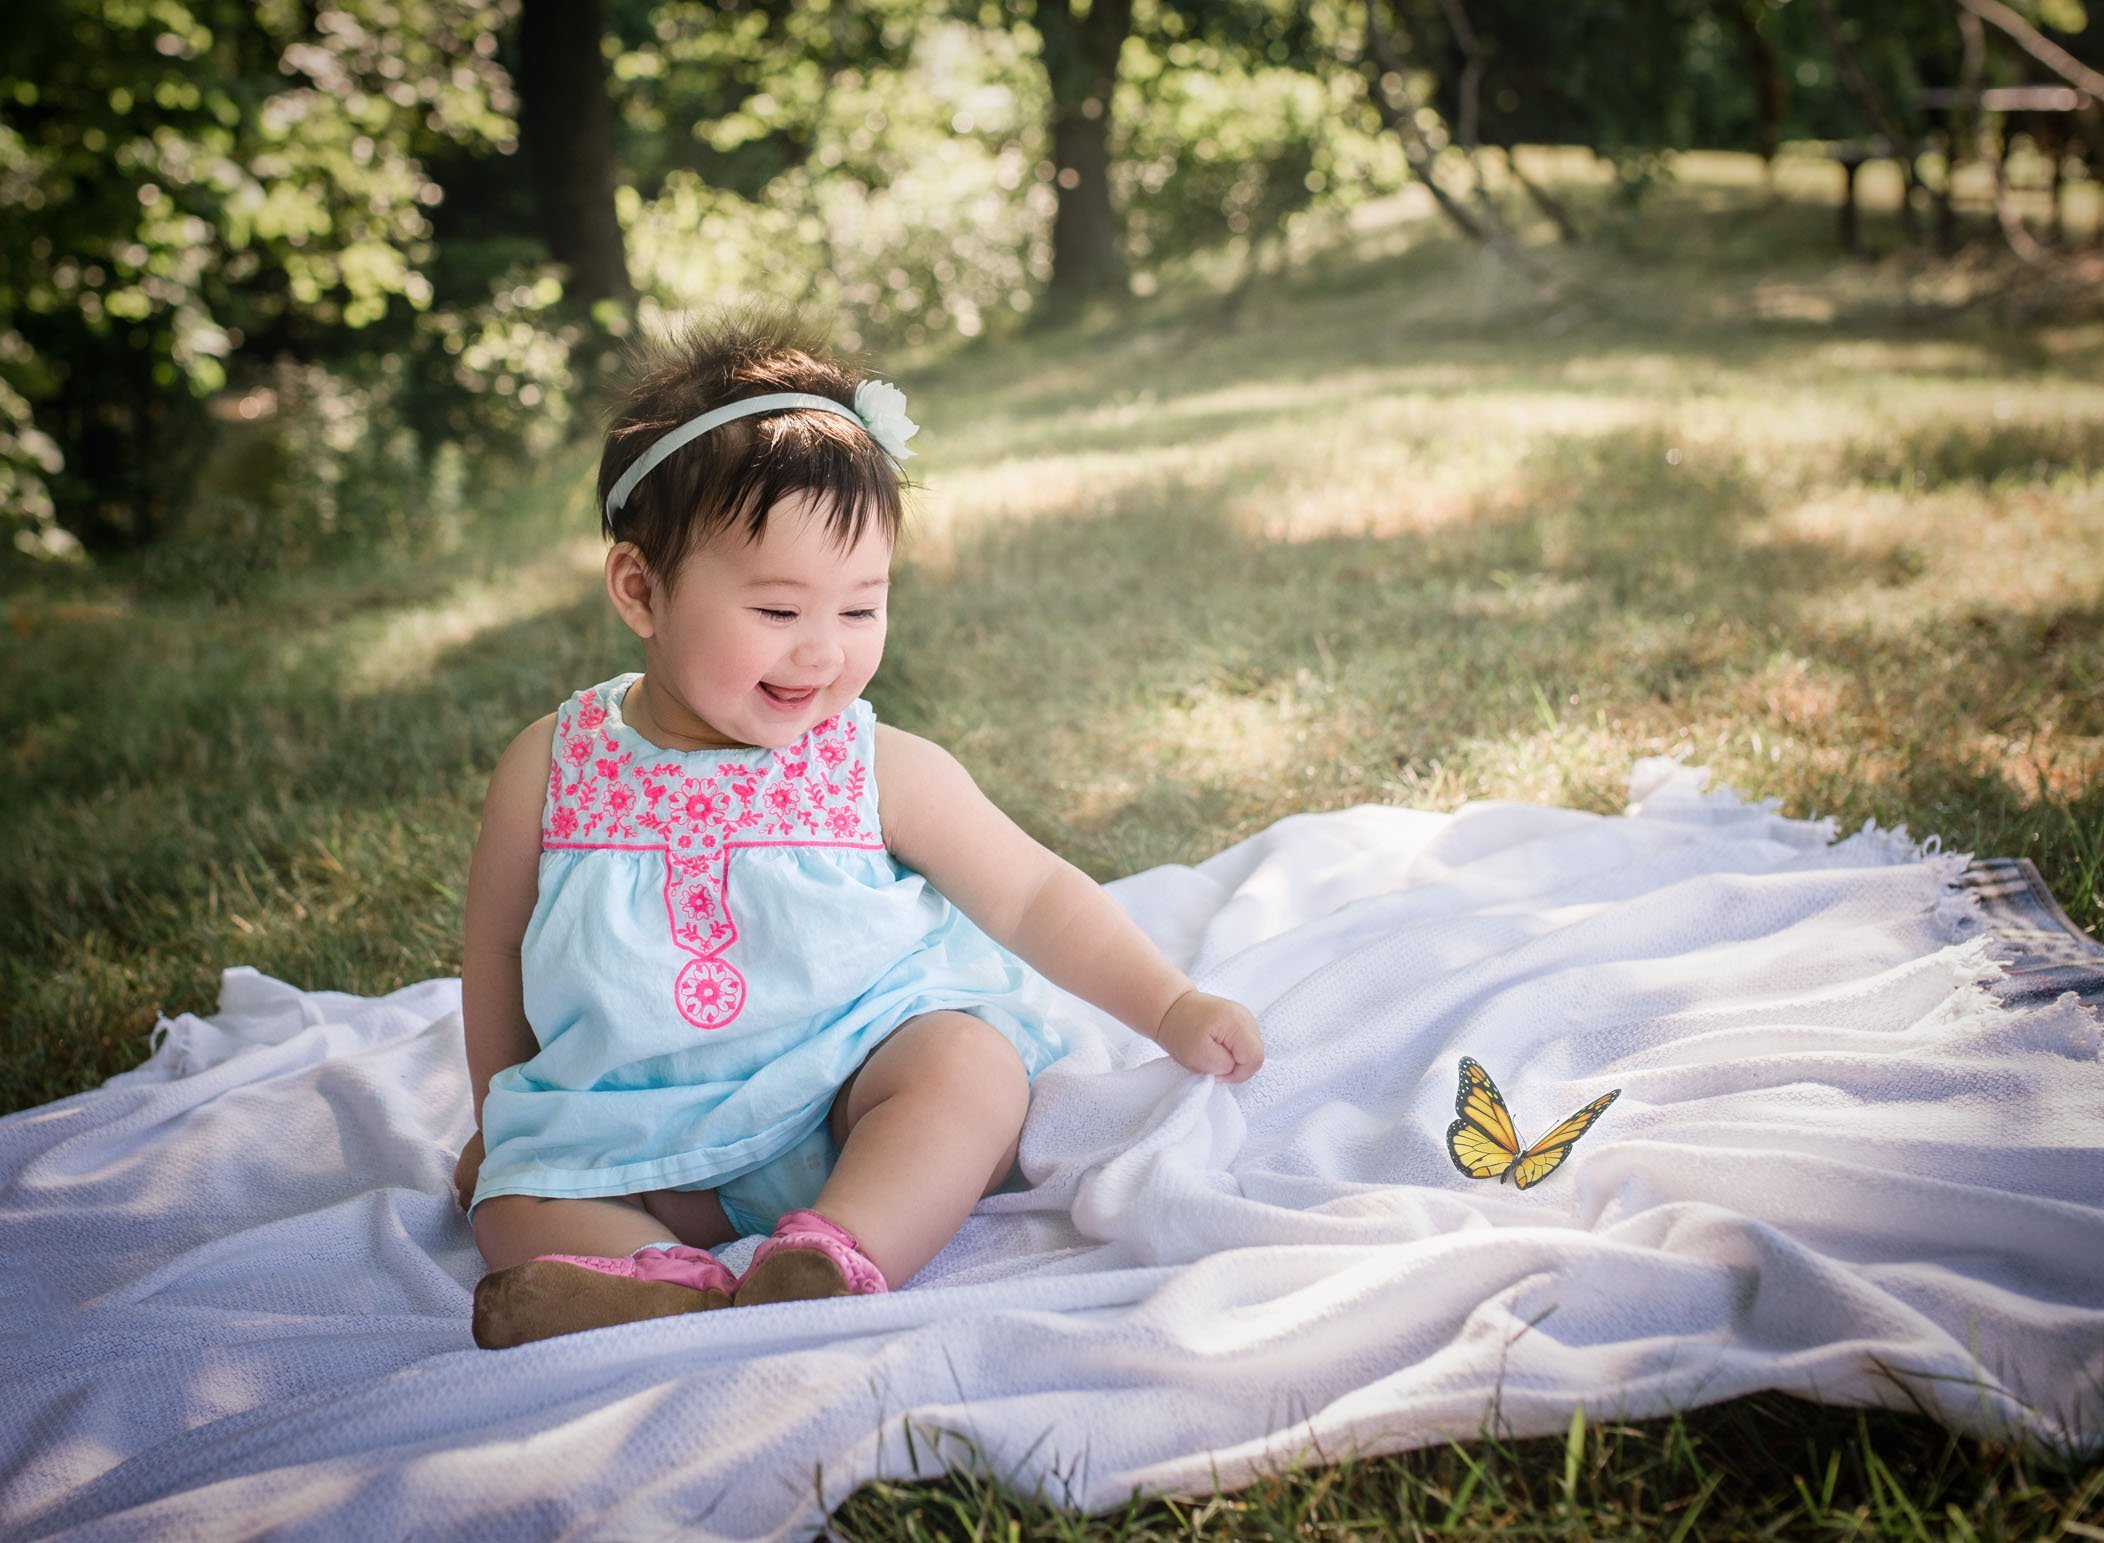 6 month old baby girl sitting on a blanket smiling at a butterfly that landed on her blanket in the sun